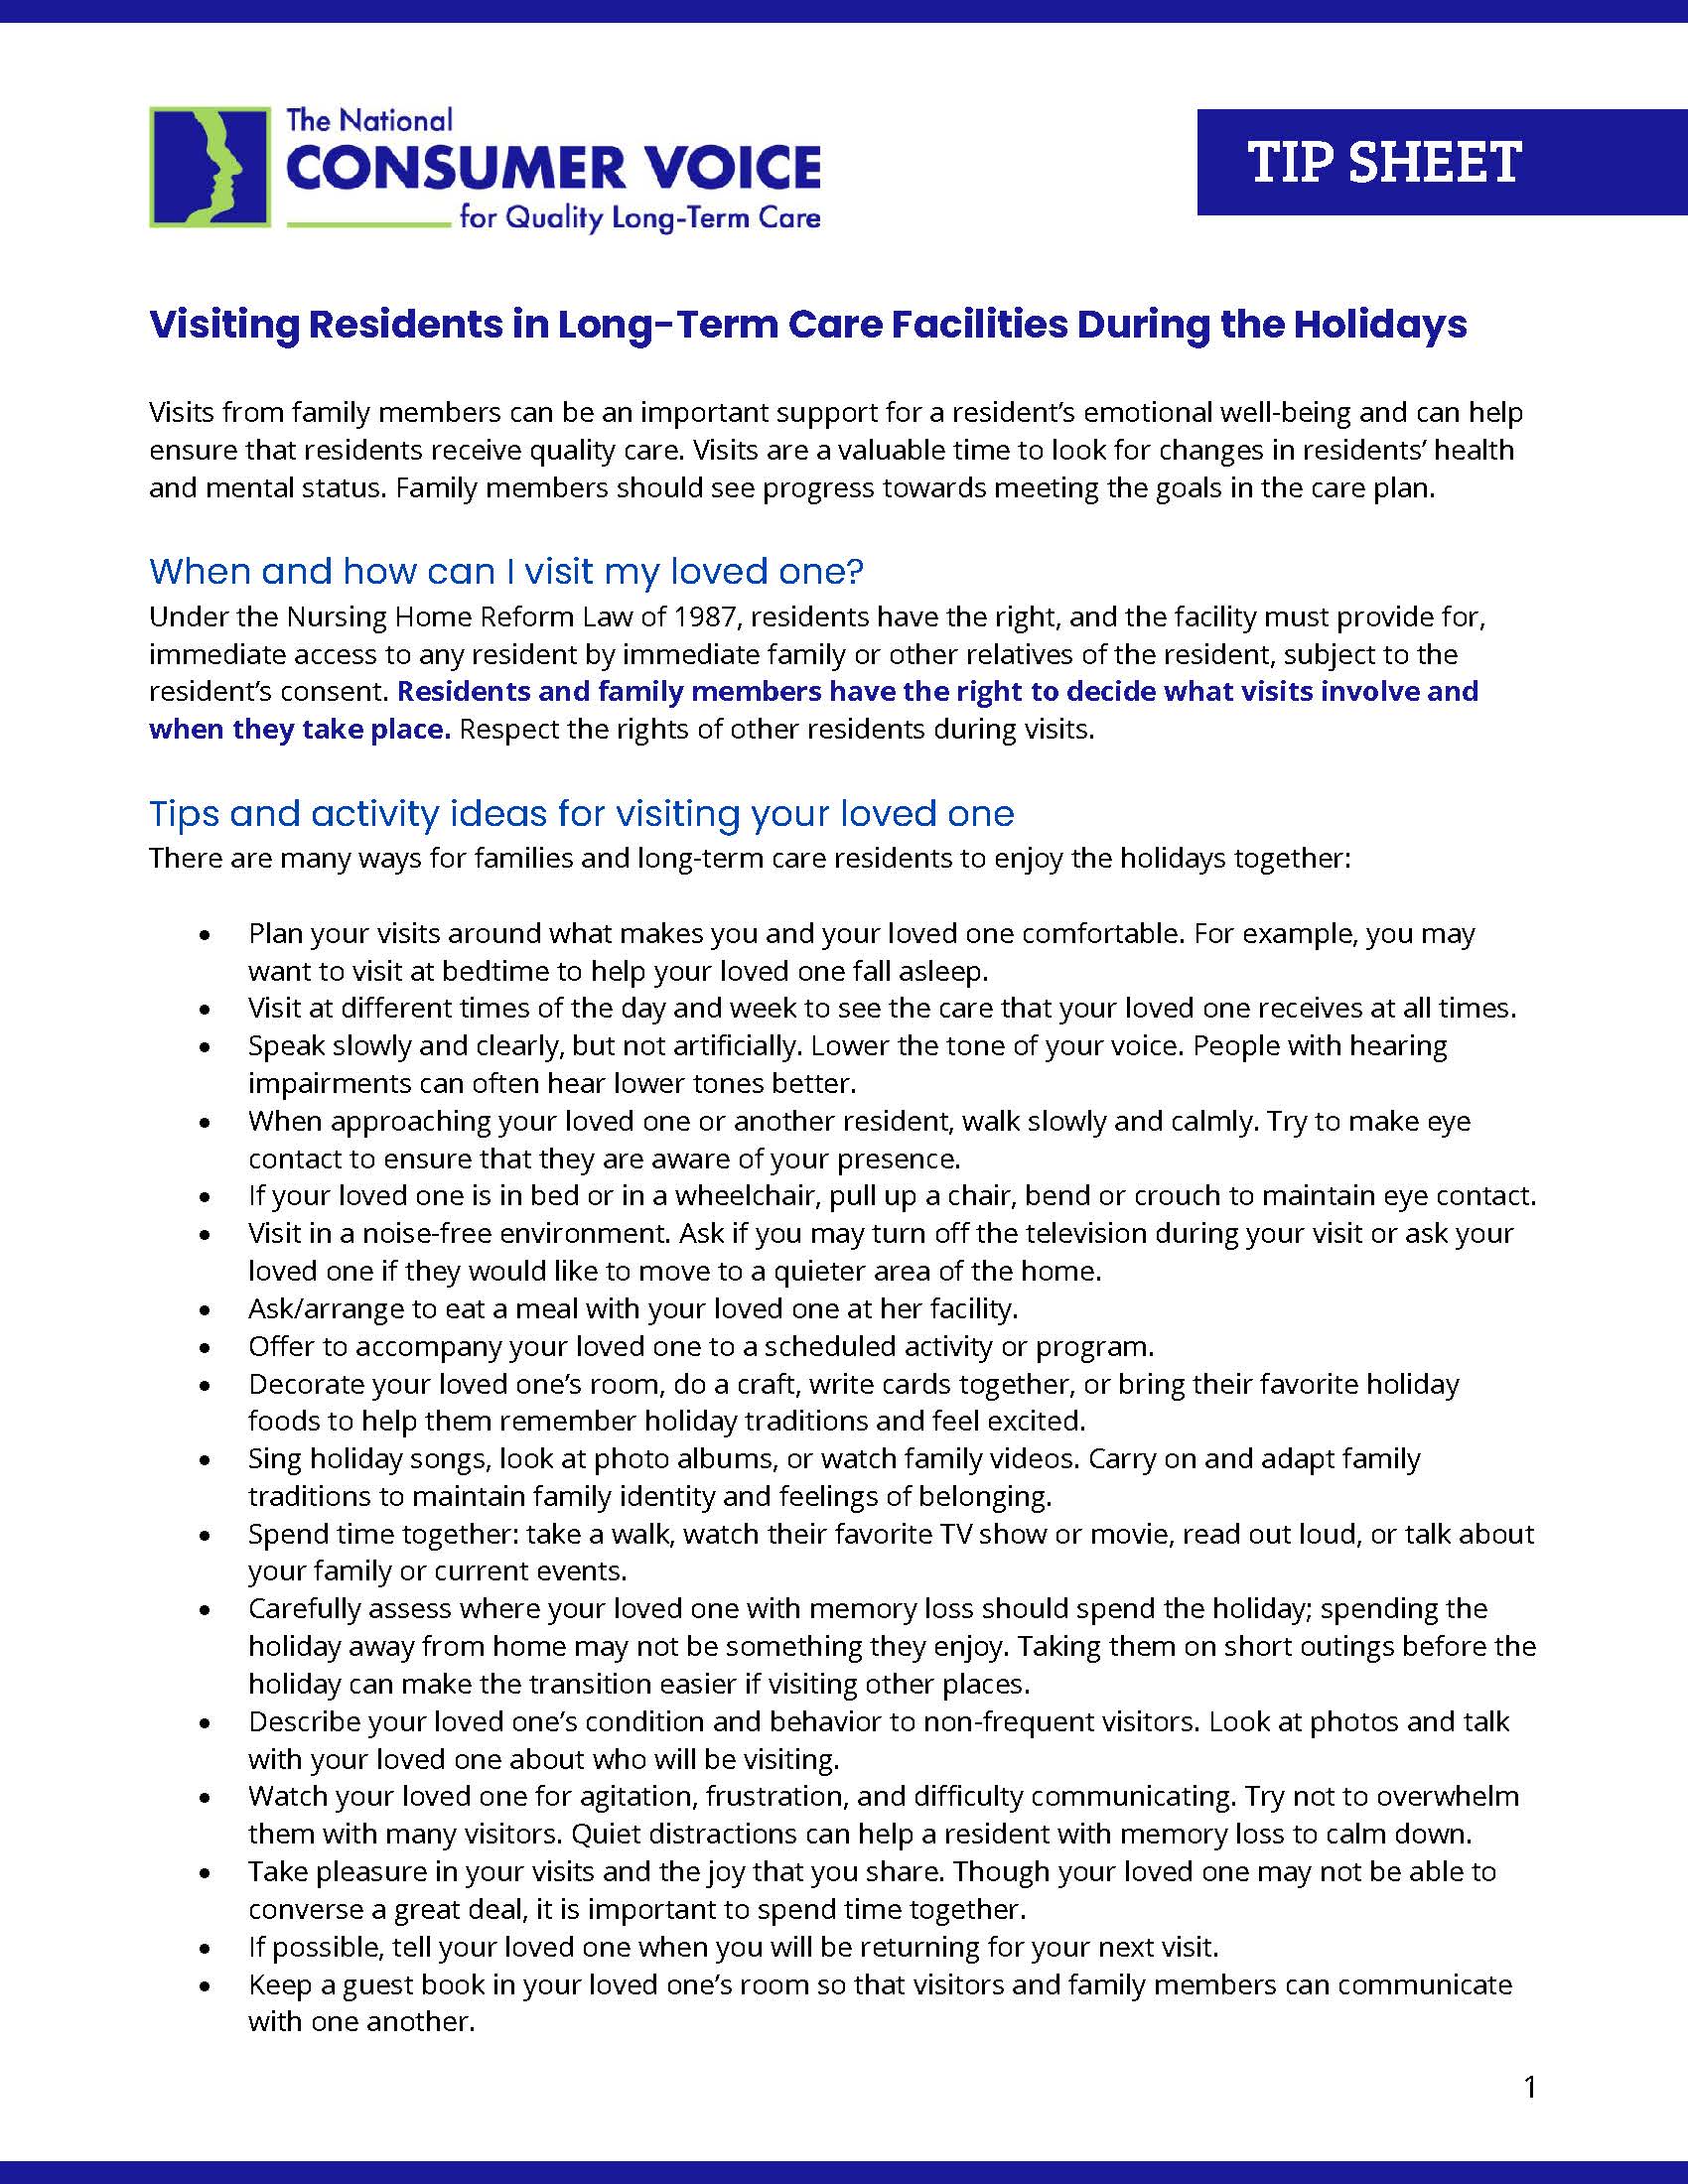 Tips for Visiting Residents Fact Sheet